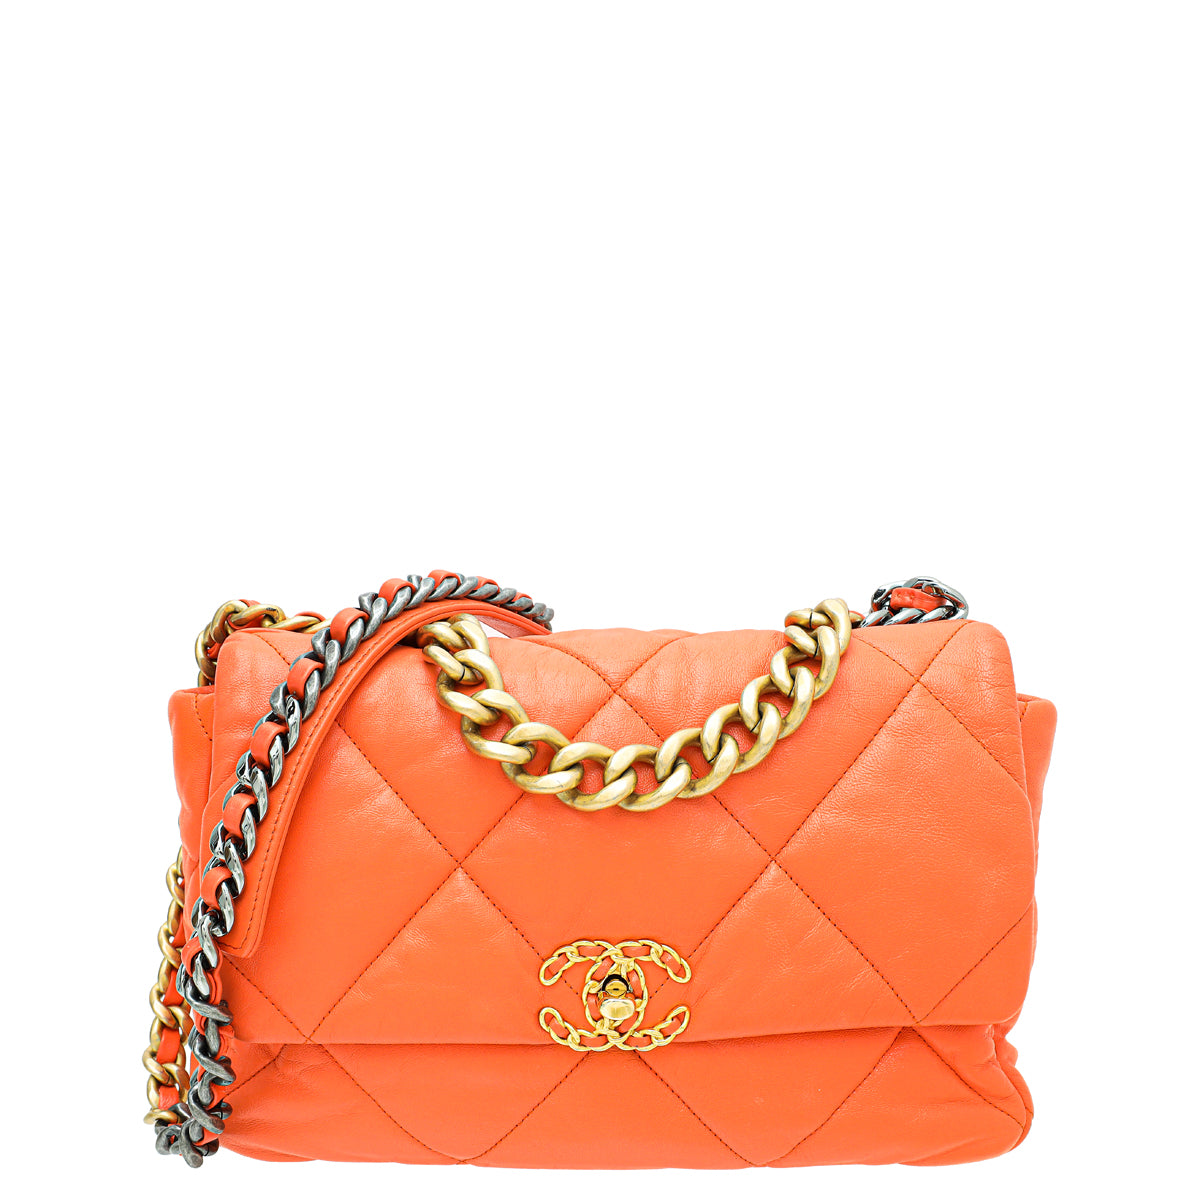 Chanel Matte Orange Crocodile Small Single Flap Bag with Gold  Lot 58383   Heritage Auctions